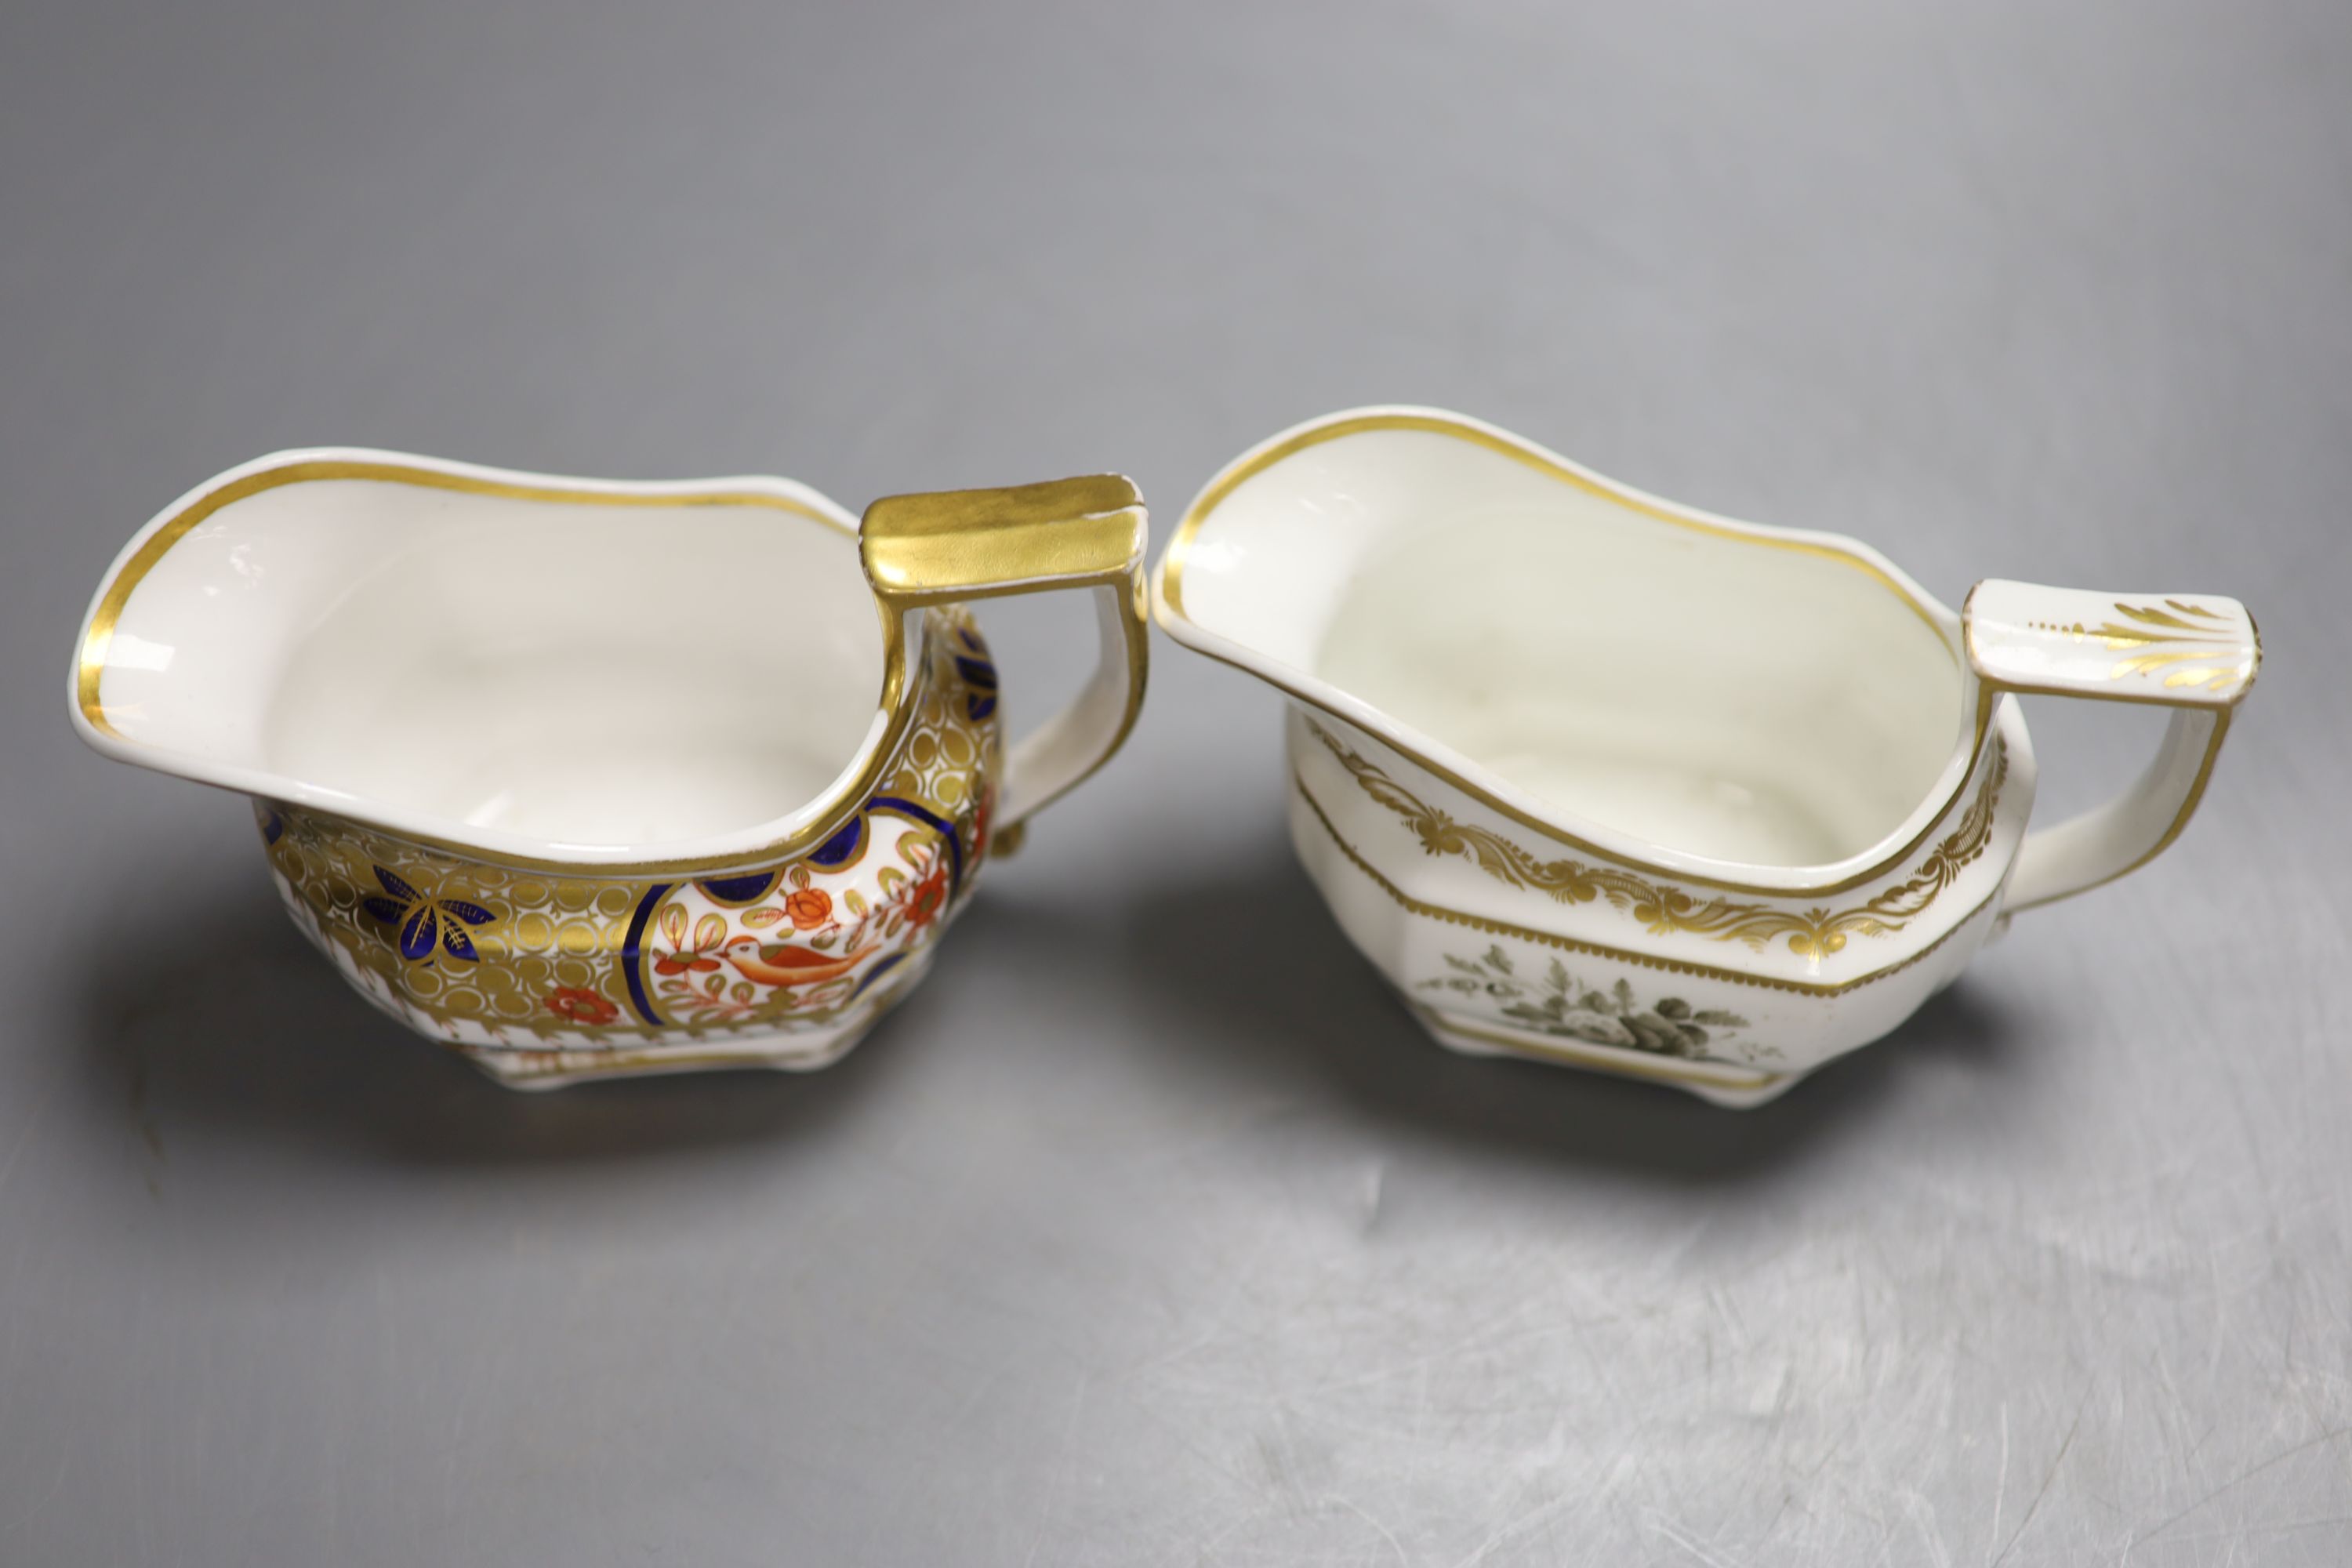 A Spode cream jug painted with Imari pattern 1495, and a Spode cream jug painted with sepia - Image 3 of 4